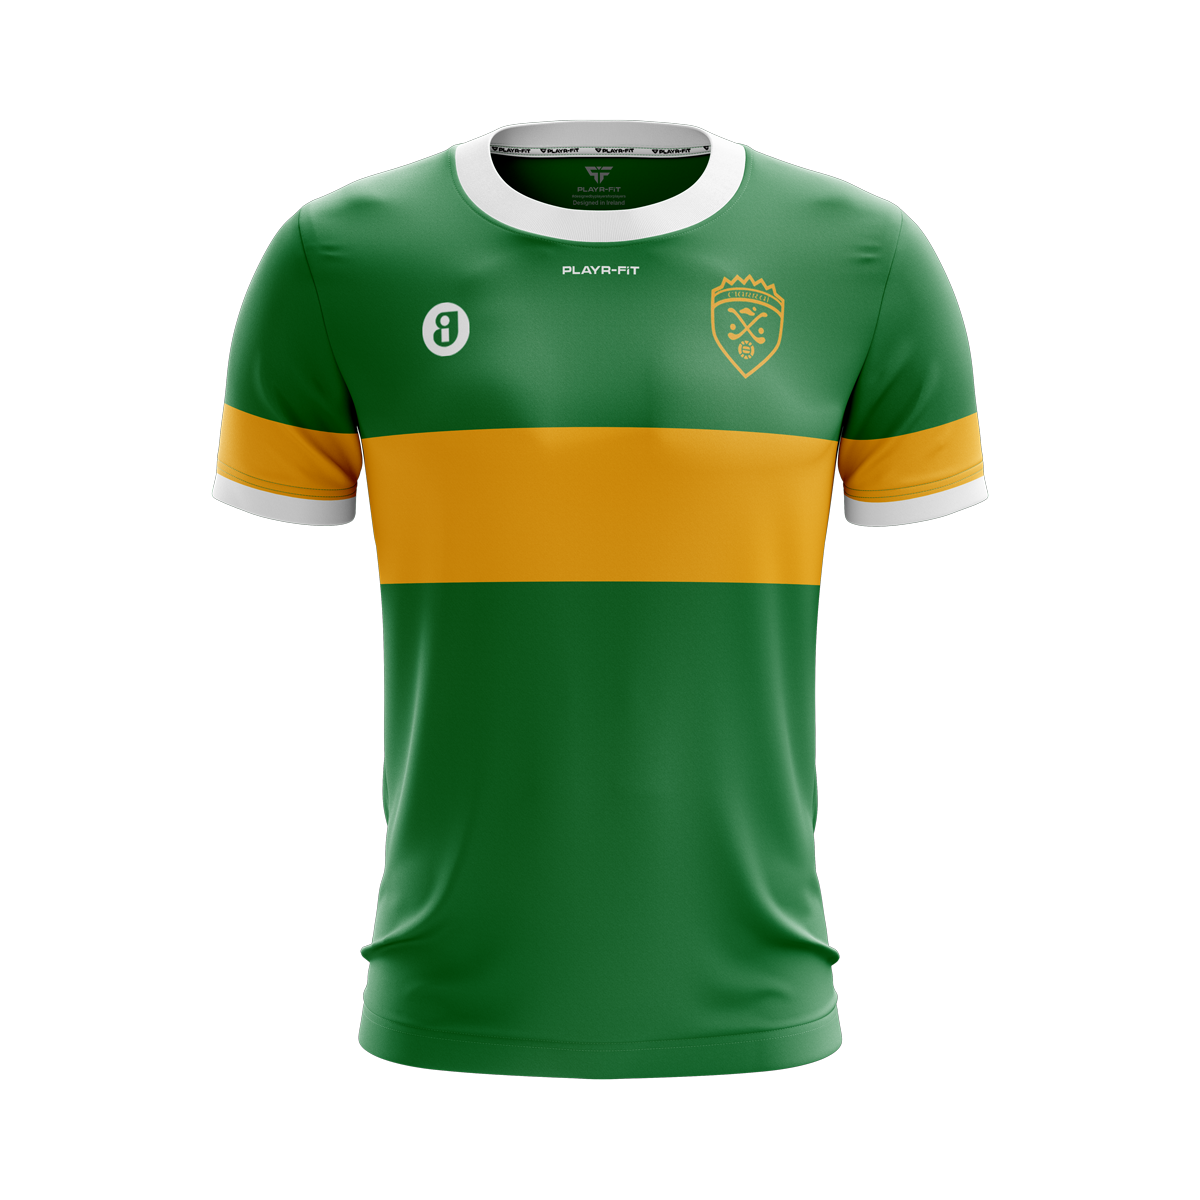 County Retro Kerry Men's Jersey - Home - PLAYR-FIT - Ireland & UK